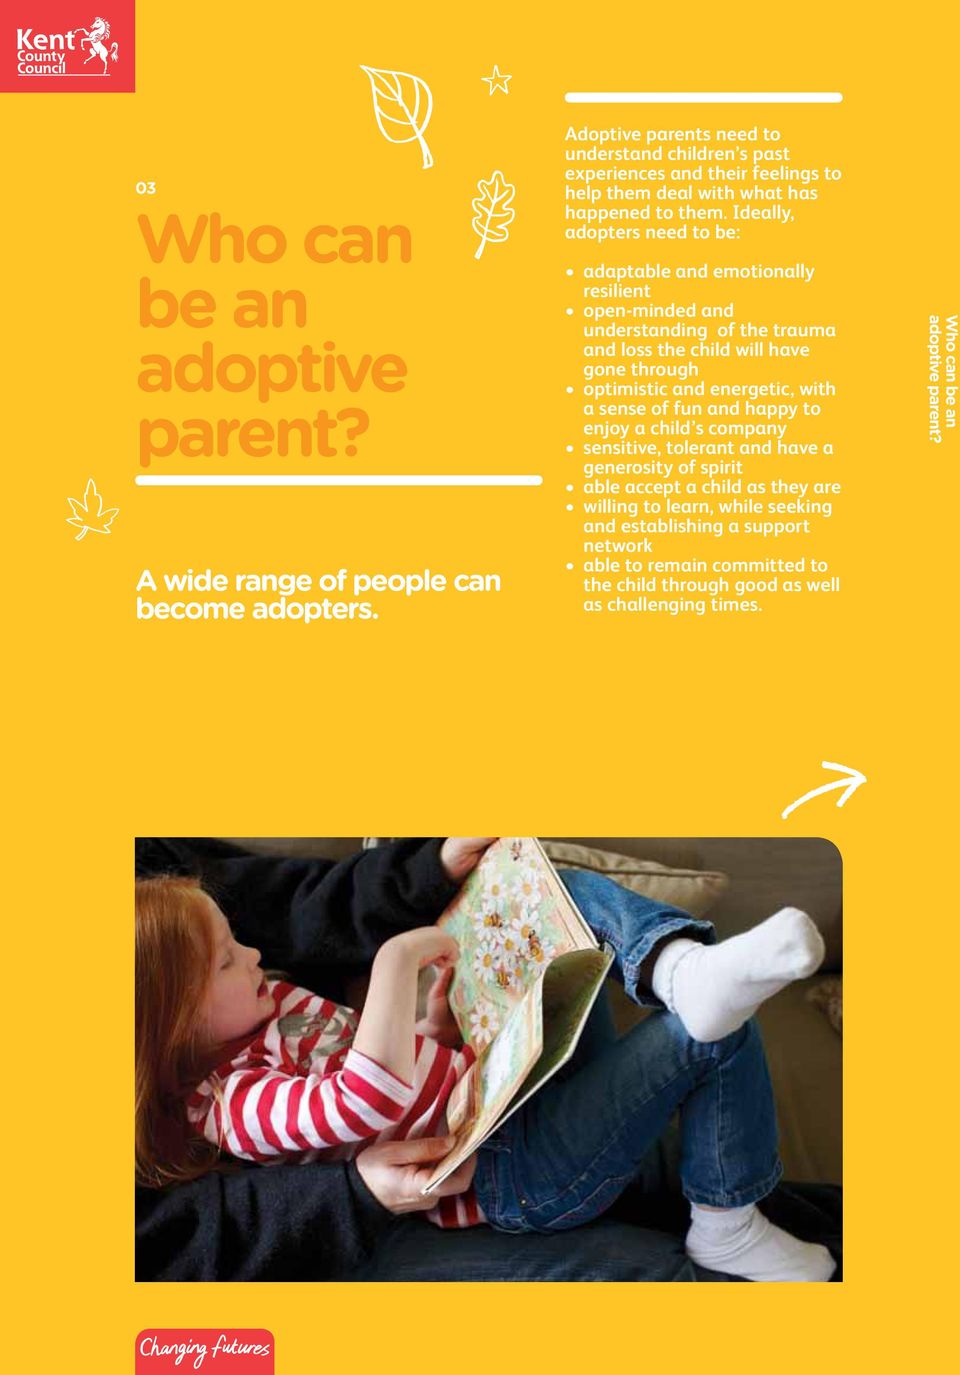 Ideally, adopters need to be: adaptable and emotionally resilient open-minded and understanding of the trauma and loss the child will have gone through optimistic and